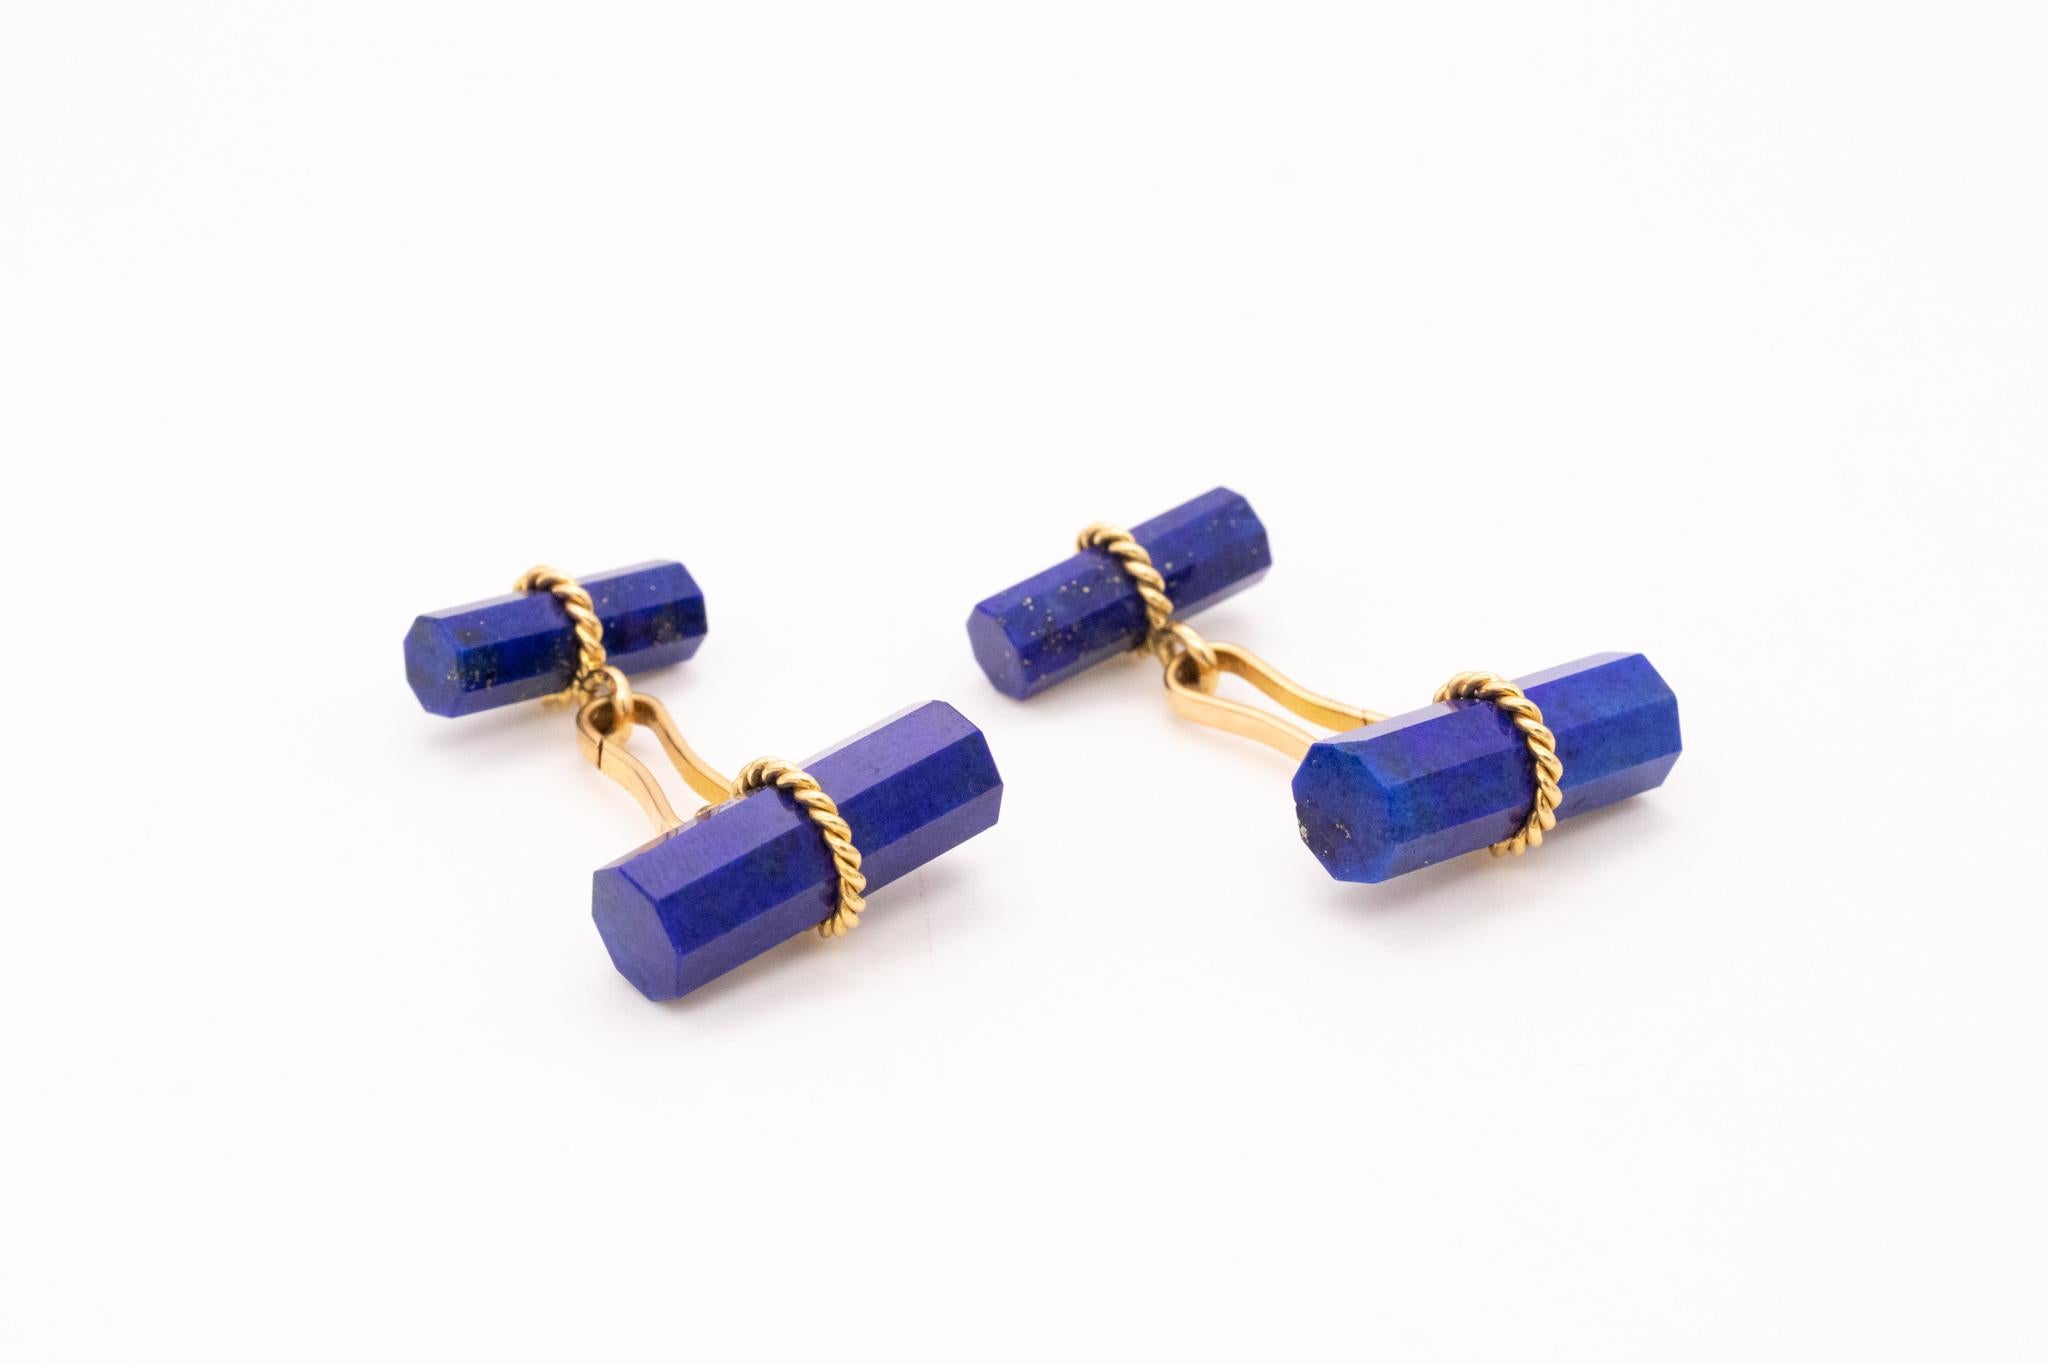 Marchak 1960 Paris Links Cufflinks with Afghani Blue Lapis Lazuli in 18Kt Gold In Excellent Condition For Sale In Miami, FL